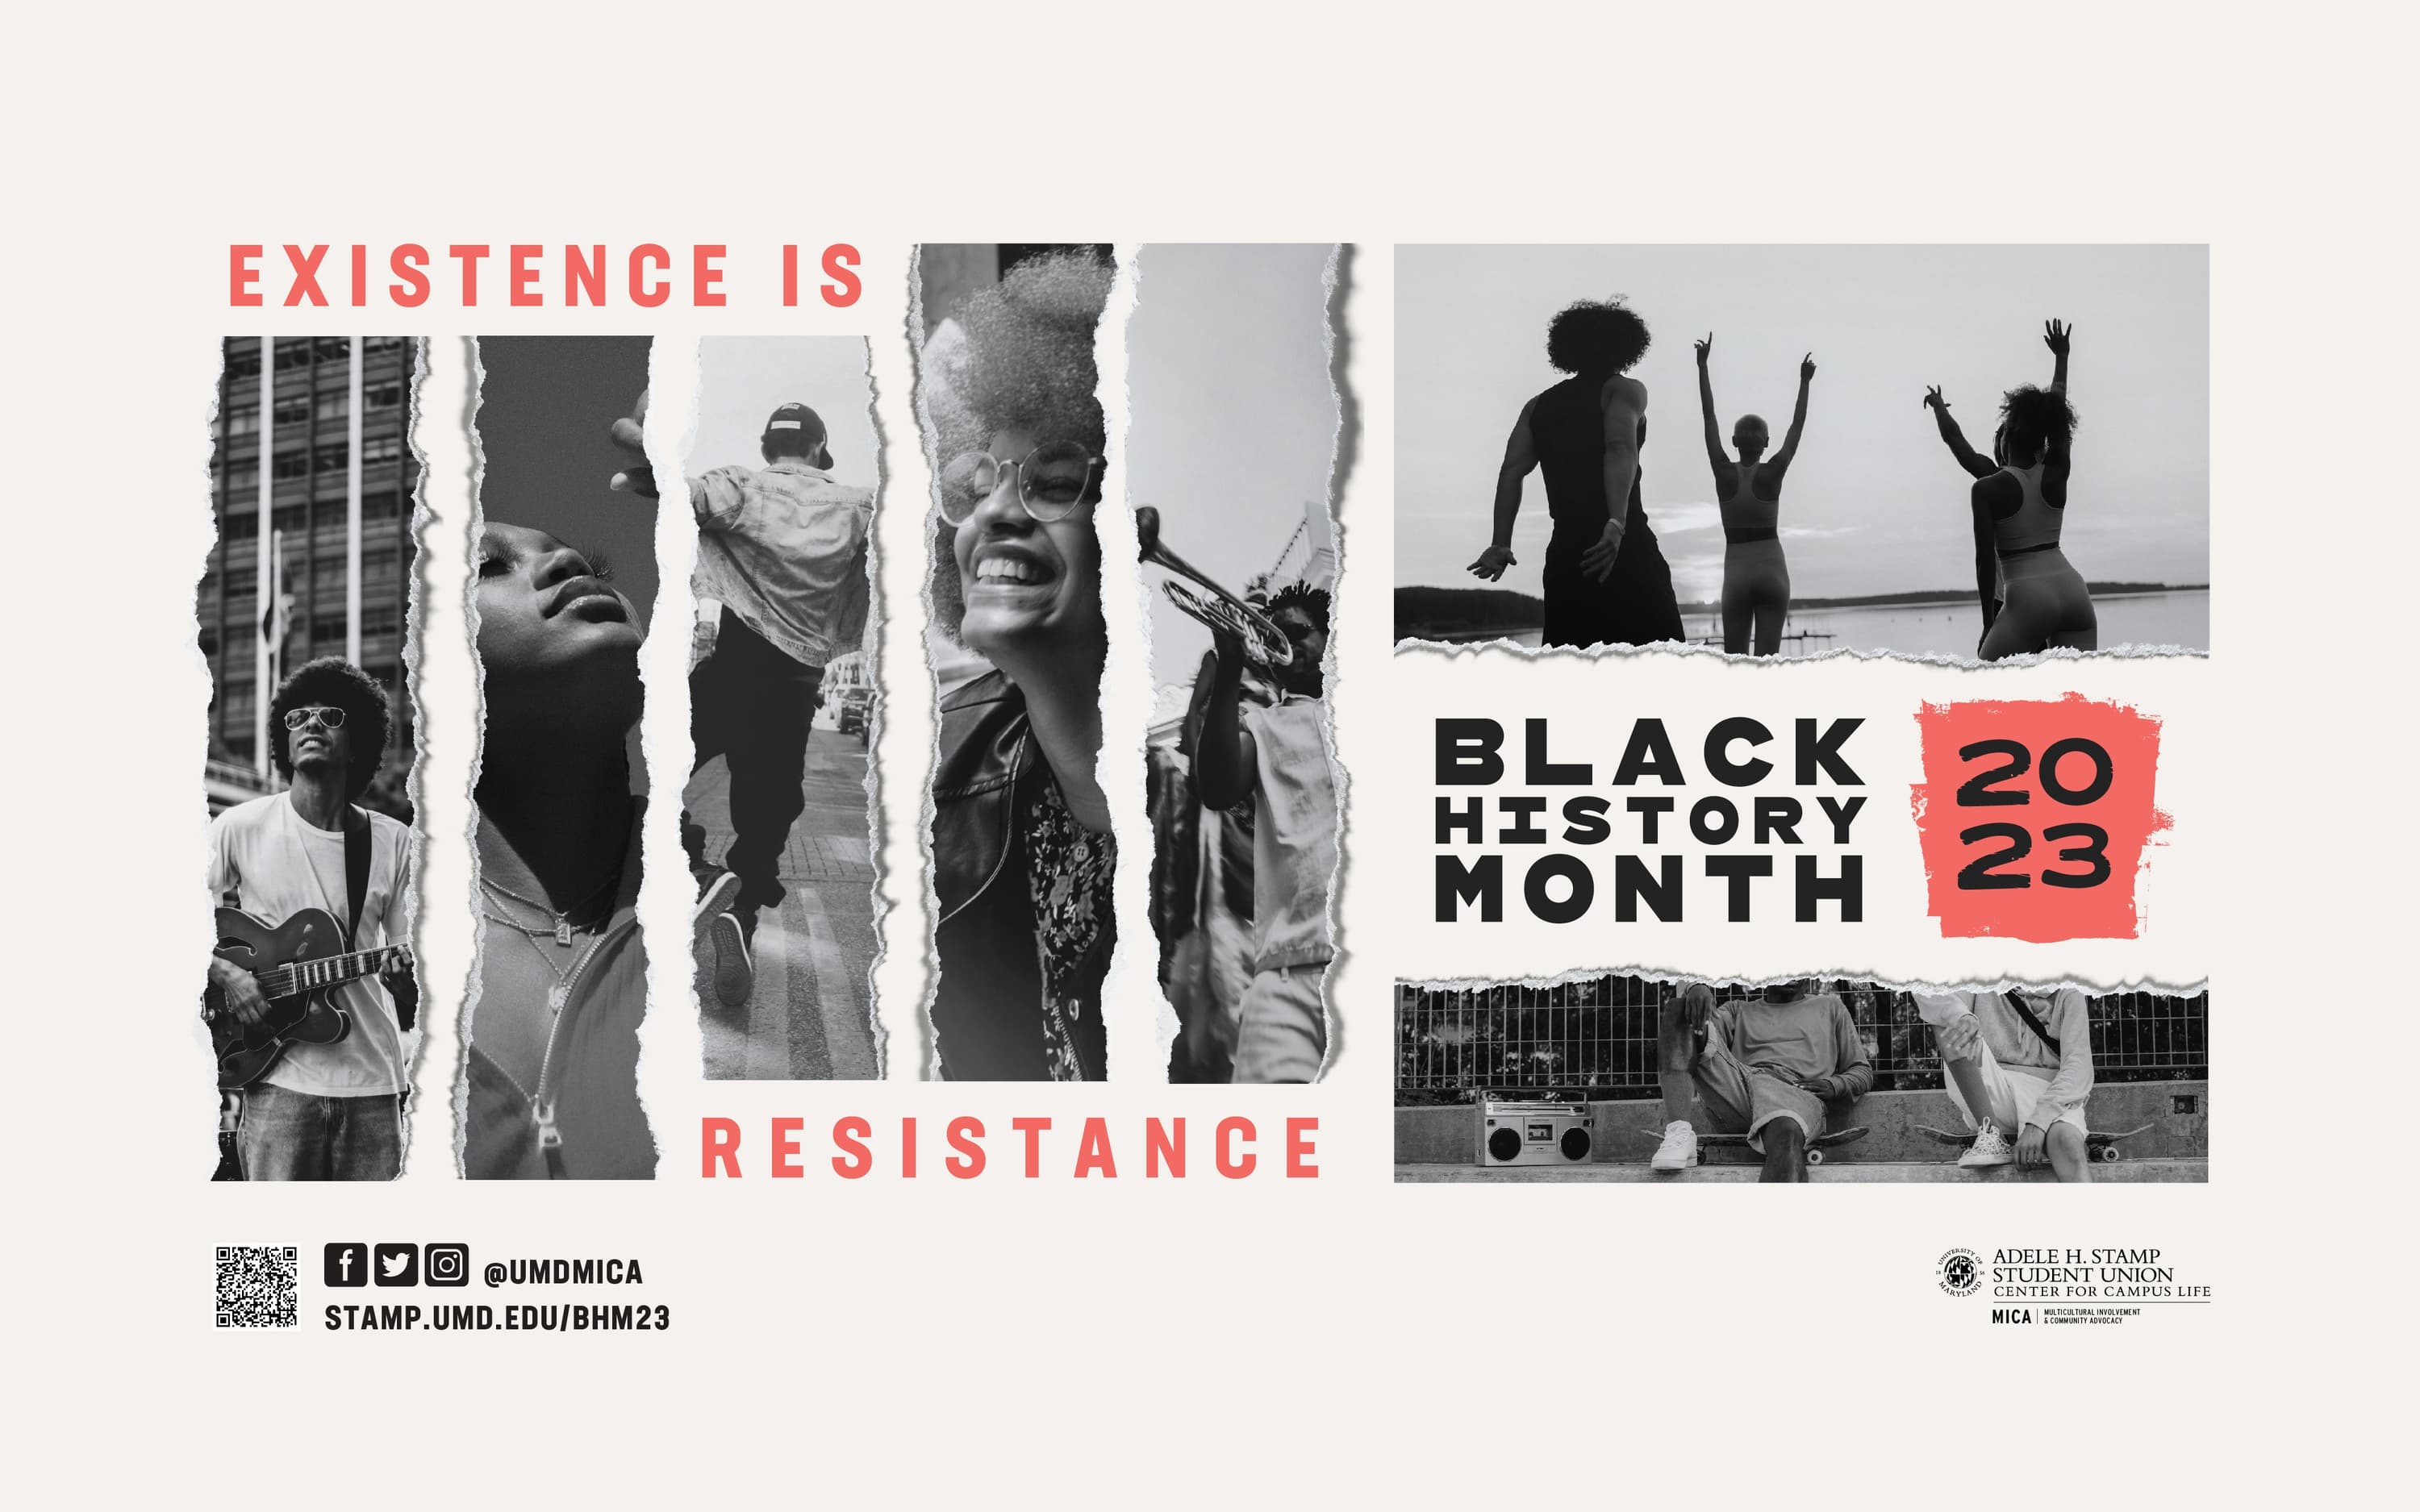 Black History Month: Existence is Resistance